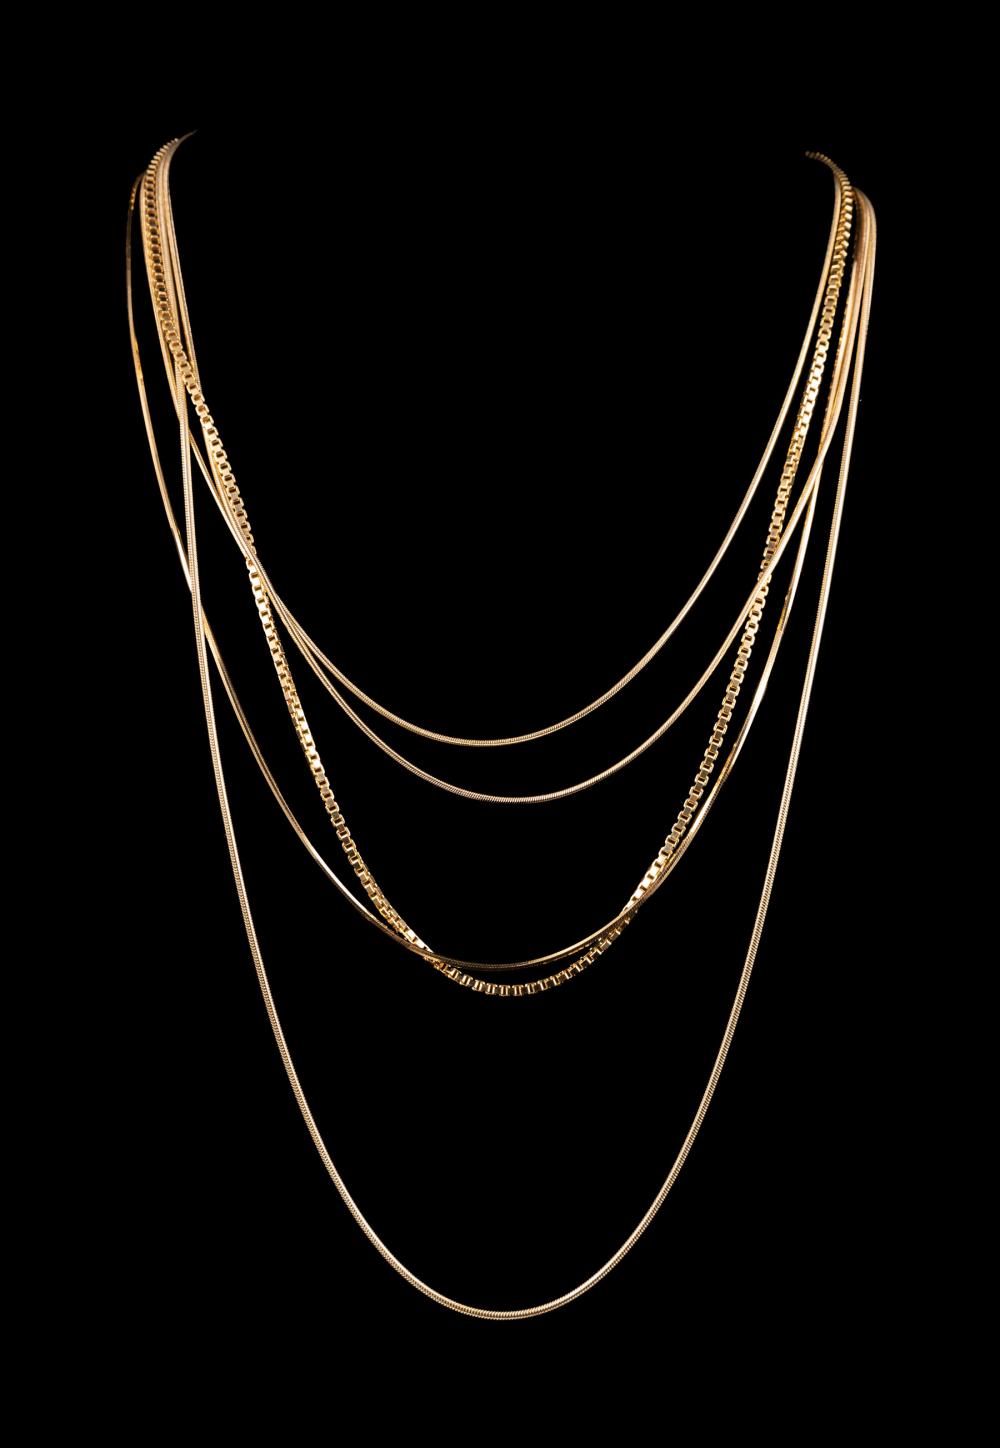 GROUP OF FIVE 14 KT YELLOW GOLD 31c047